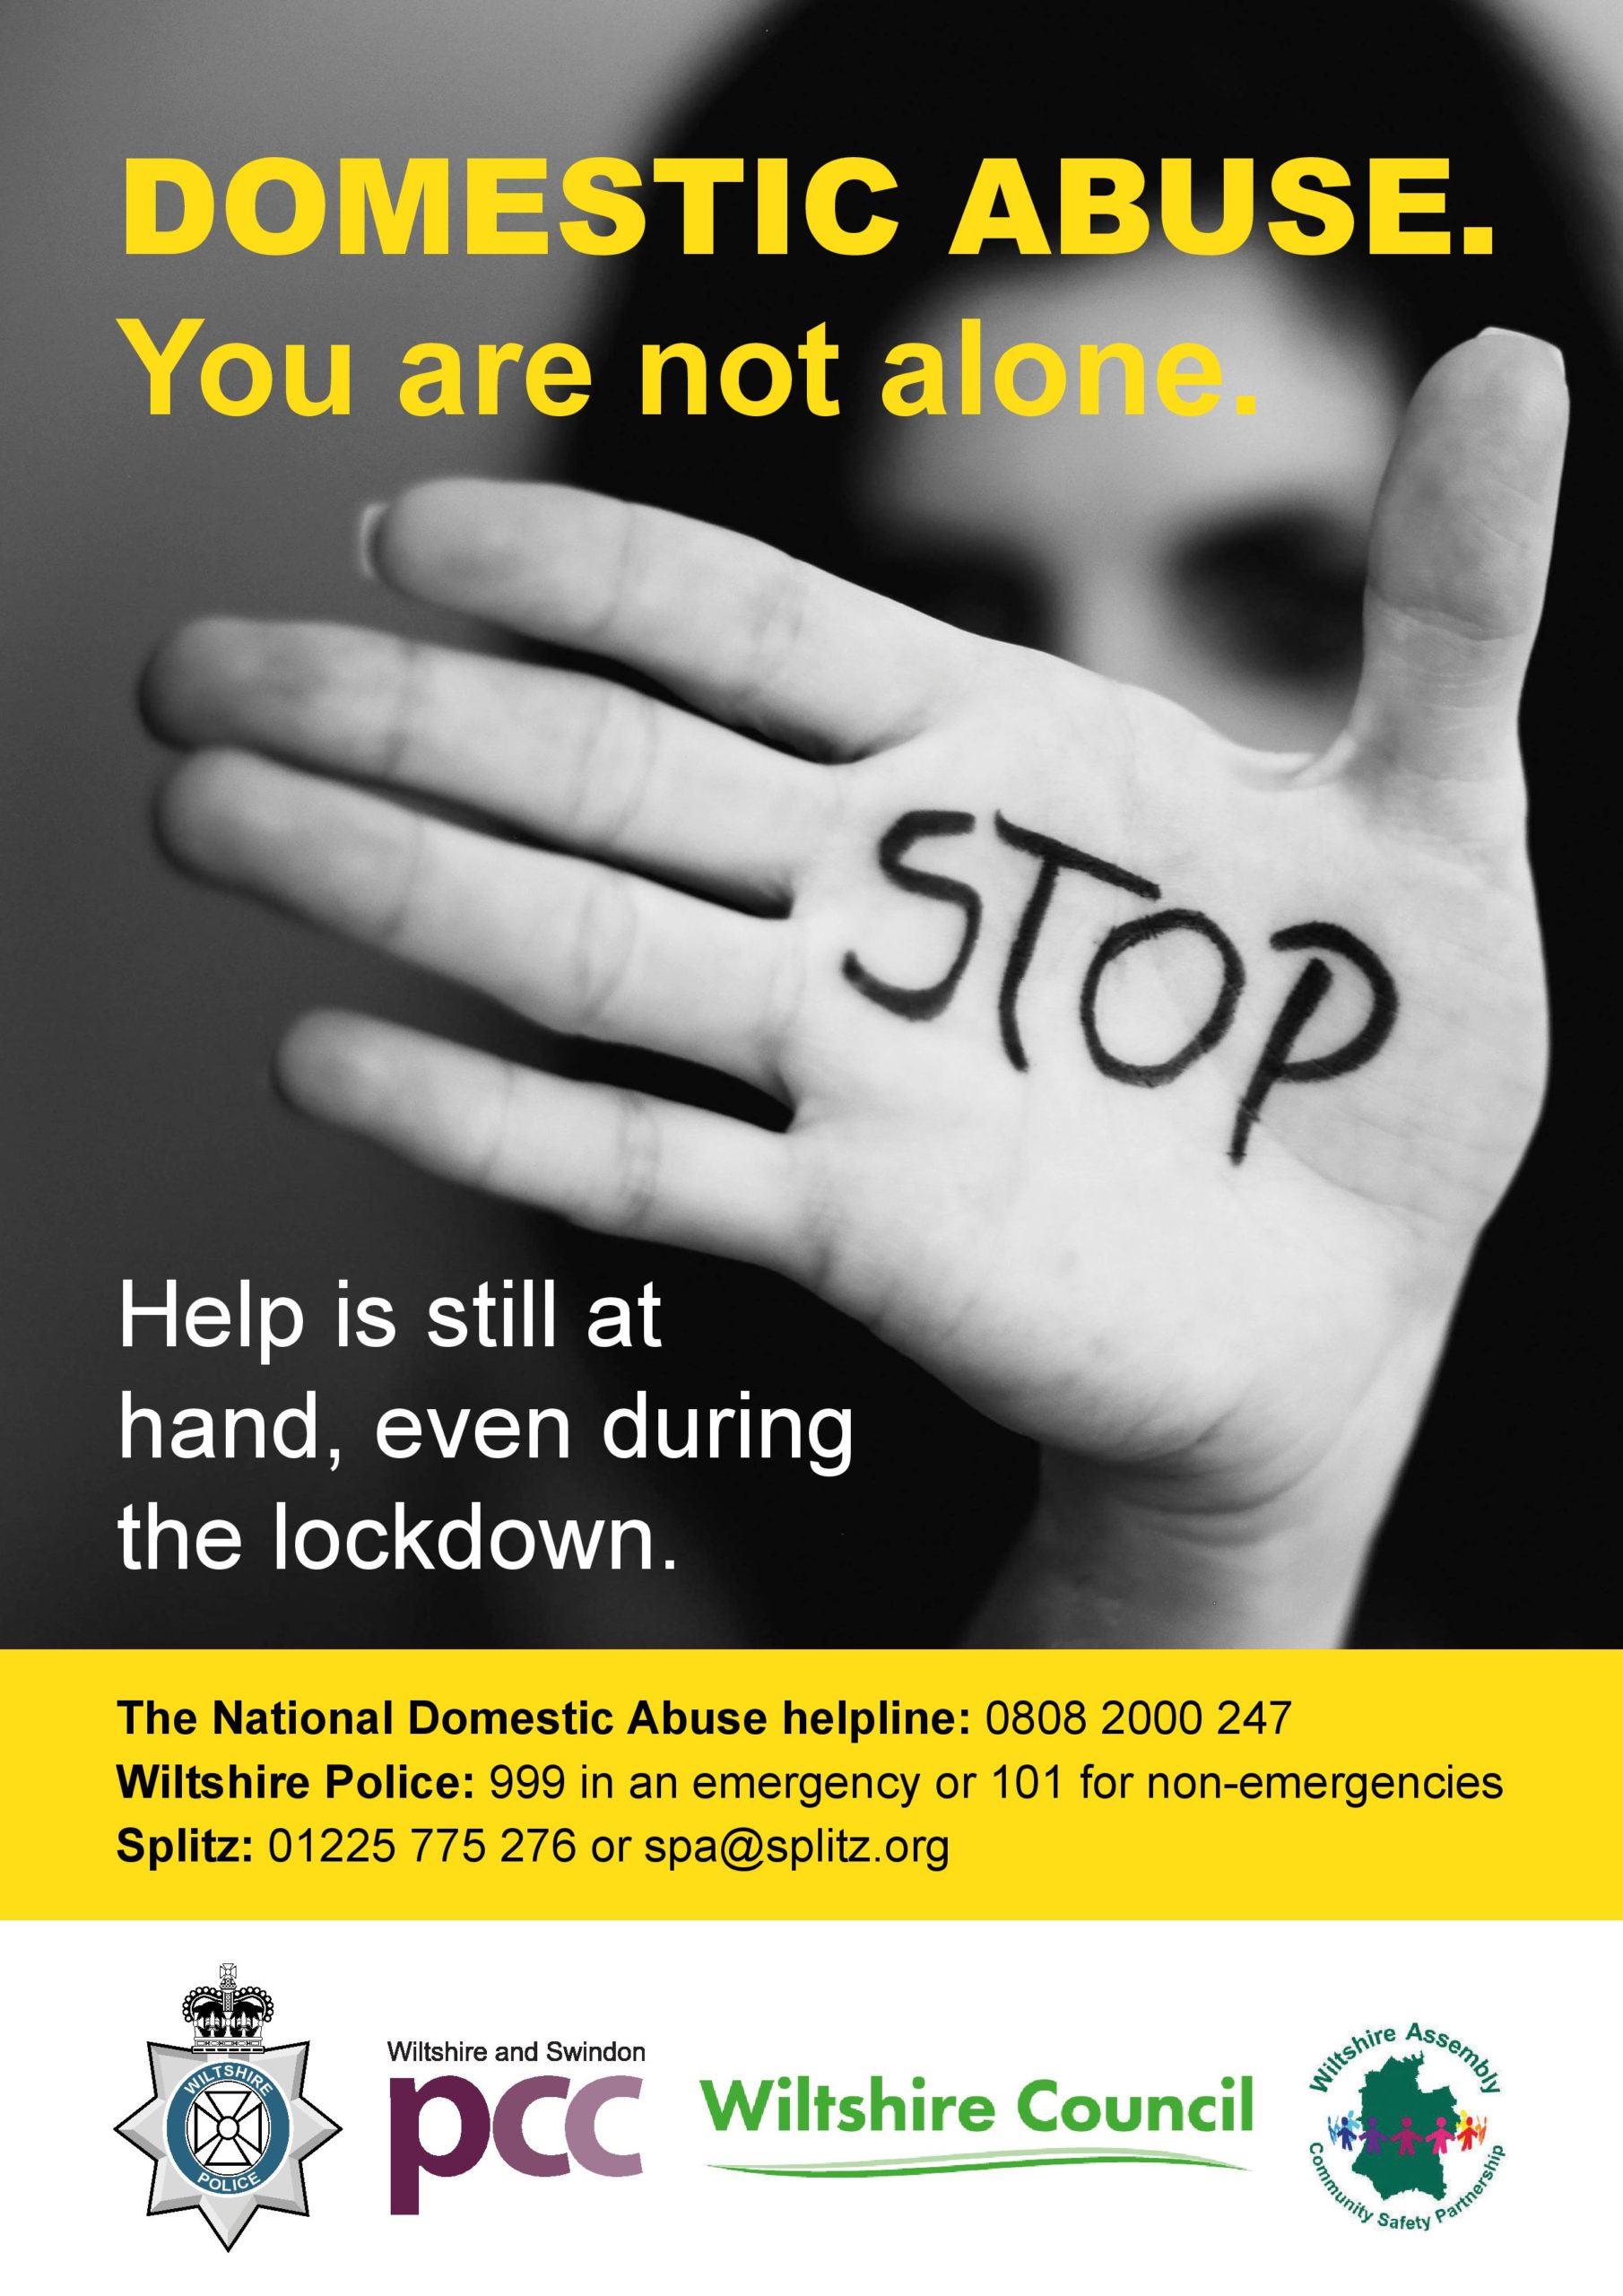 Domestic abuse posters_2020_Wiltshire_1 – Hathaway Medical Centre